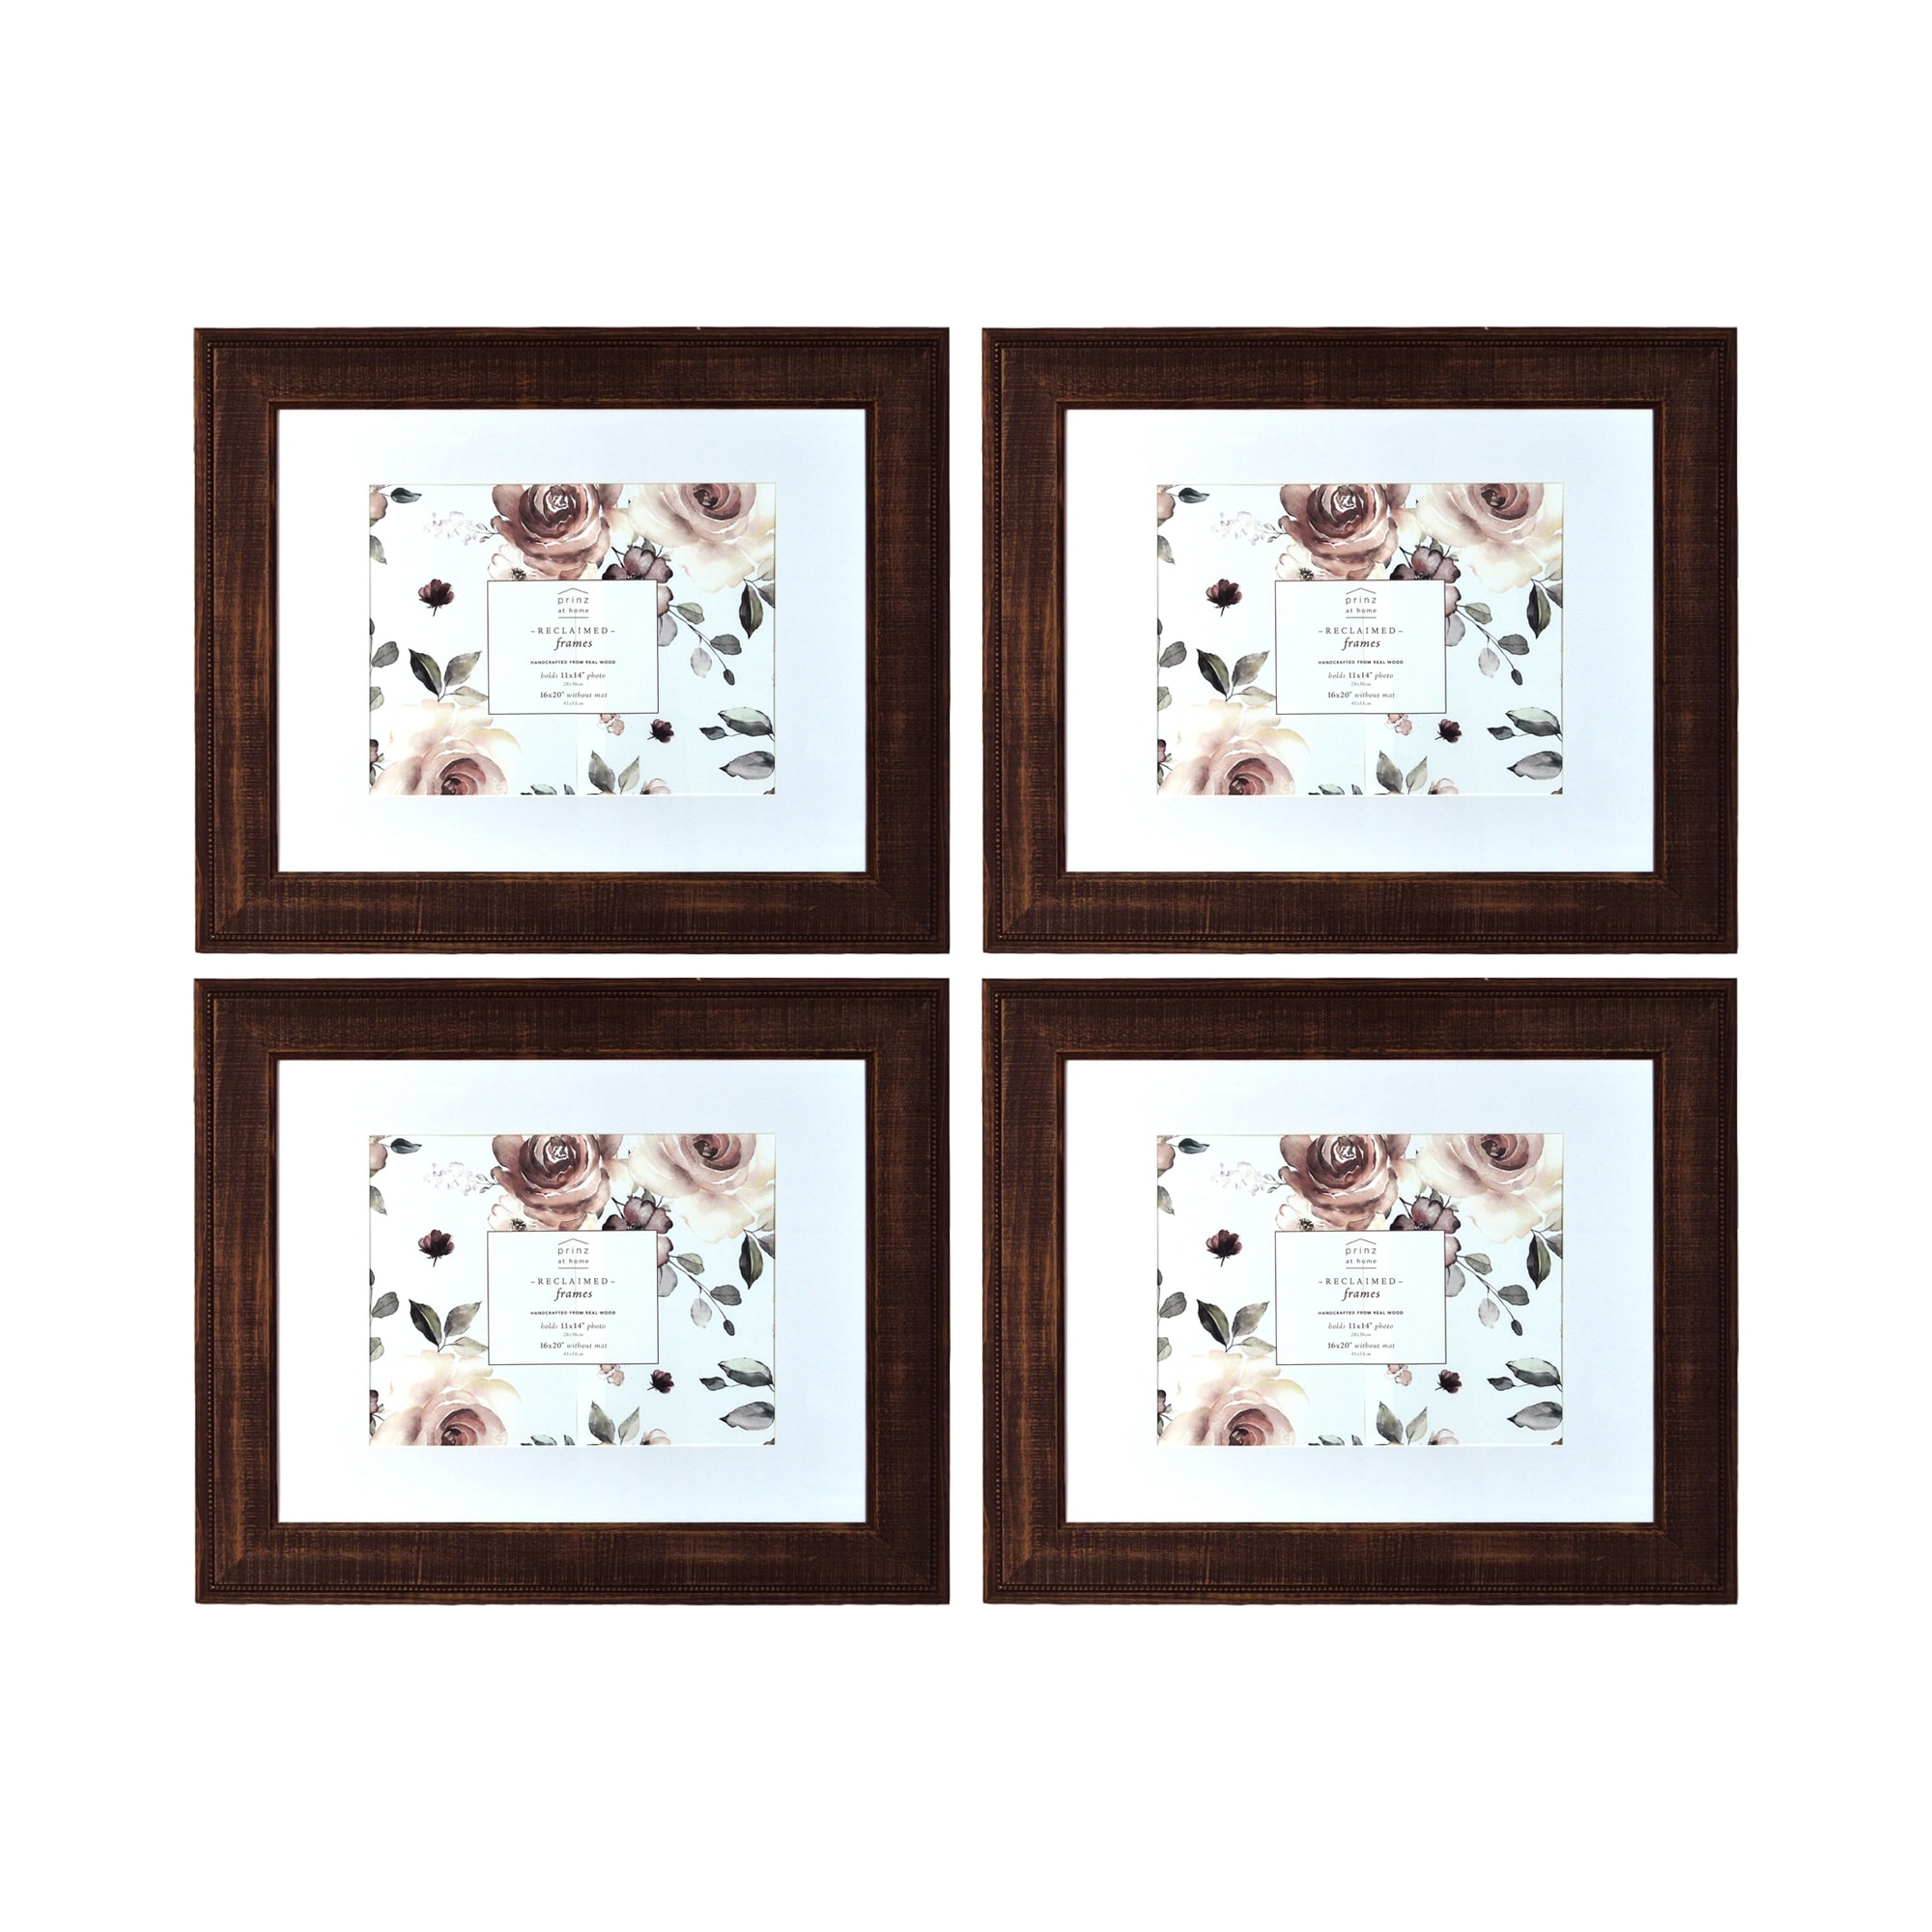 Reclaimed 16' x 20' or 11' x 14' Walnut Finish Rustic Beaded Picture Frame, Set of Four